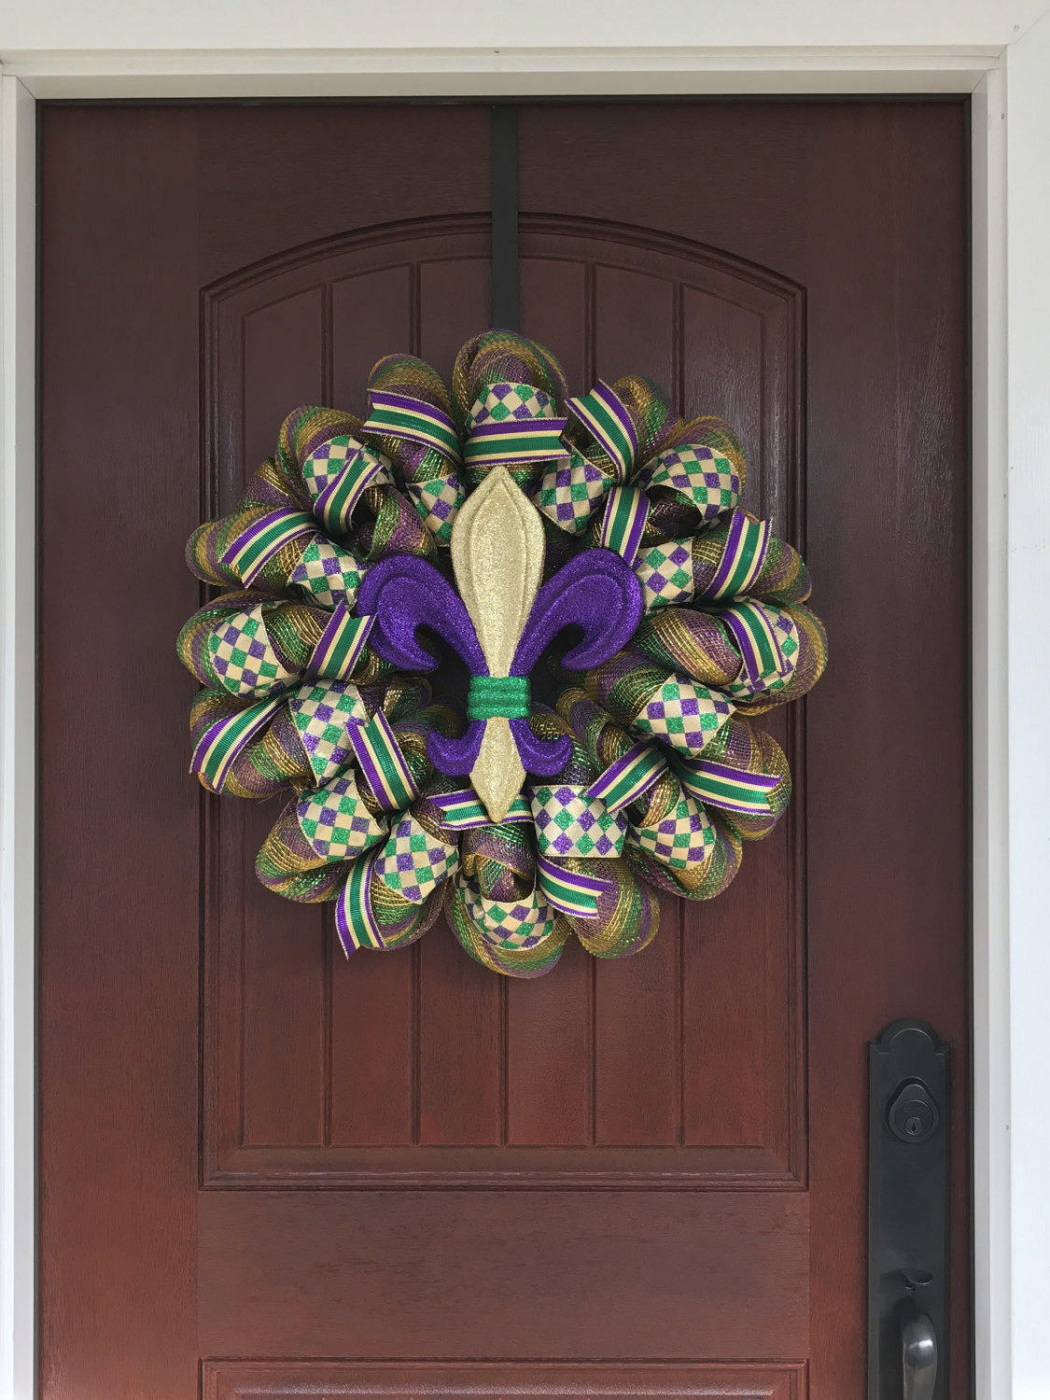 word-image-14 Fat Tuesday is Coming! 11 Classy Mardis Gras Wreaths for Your Front Door